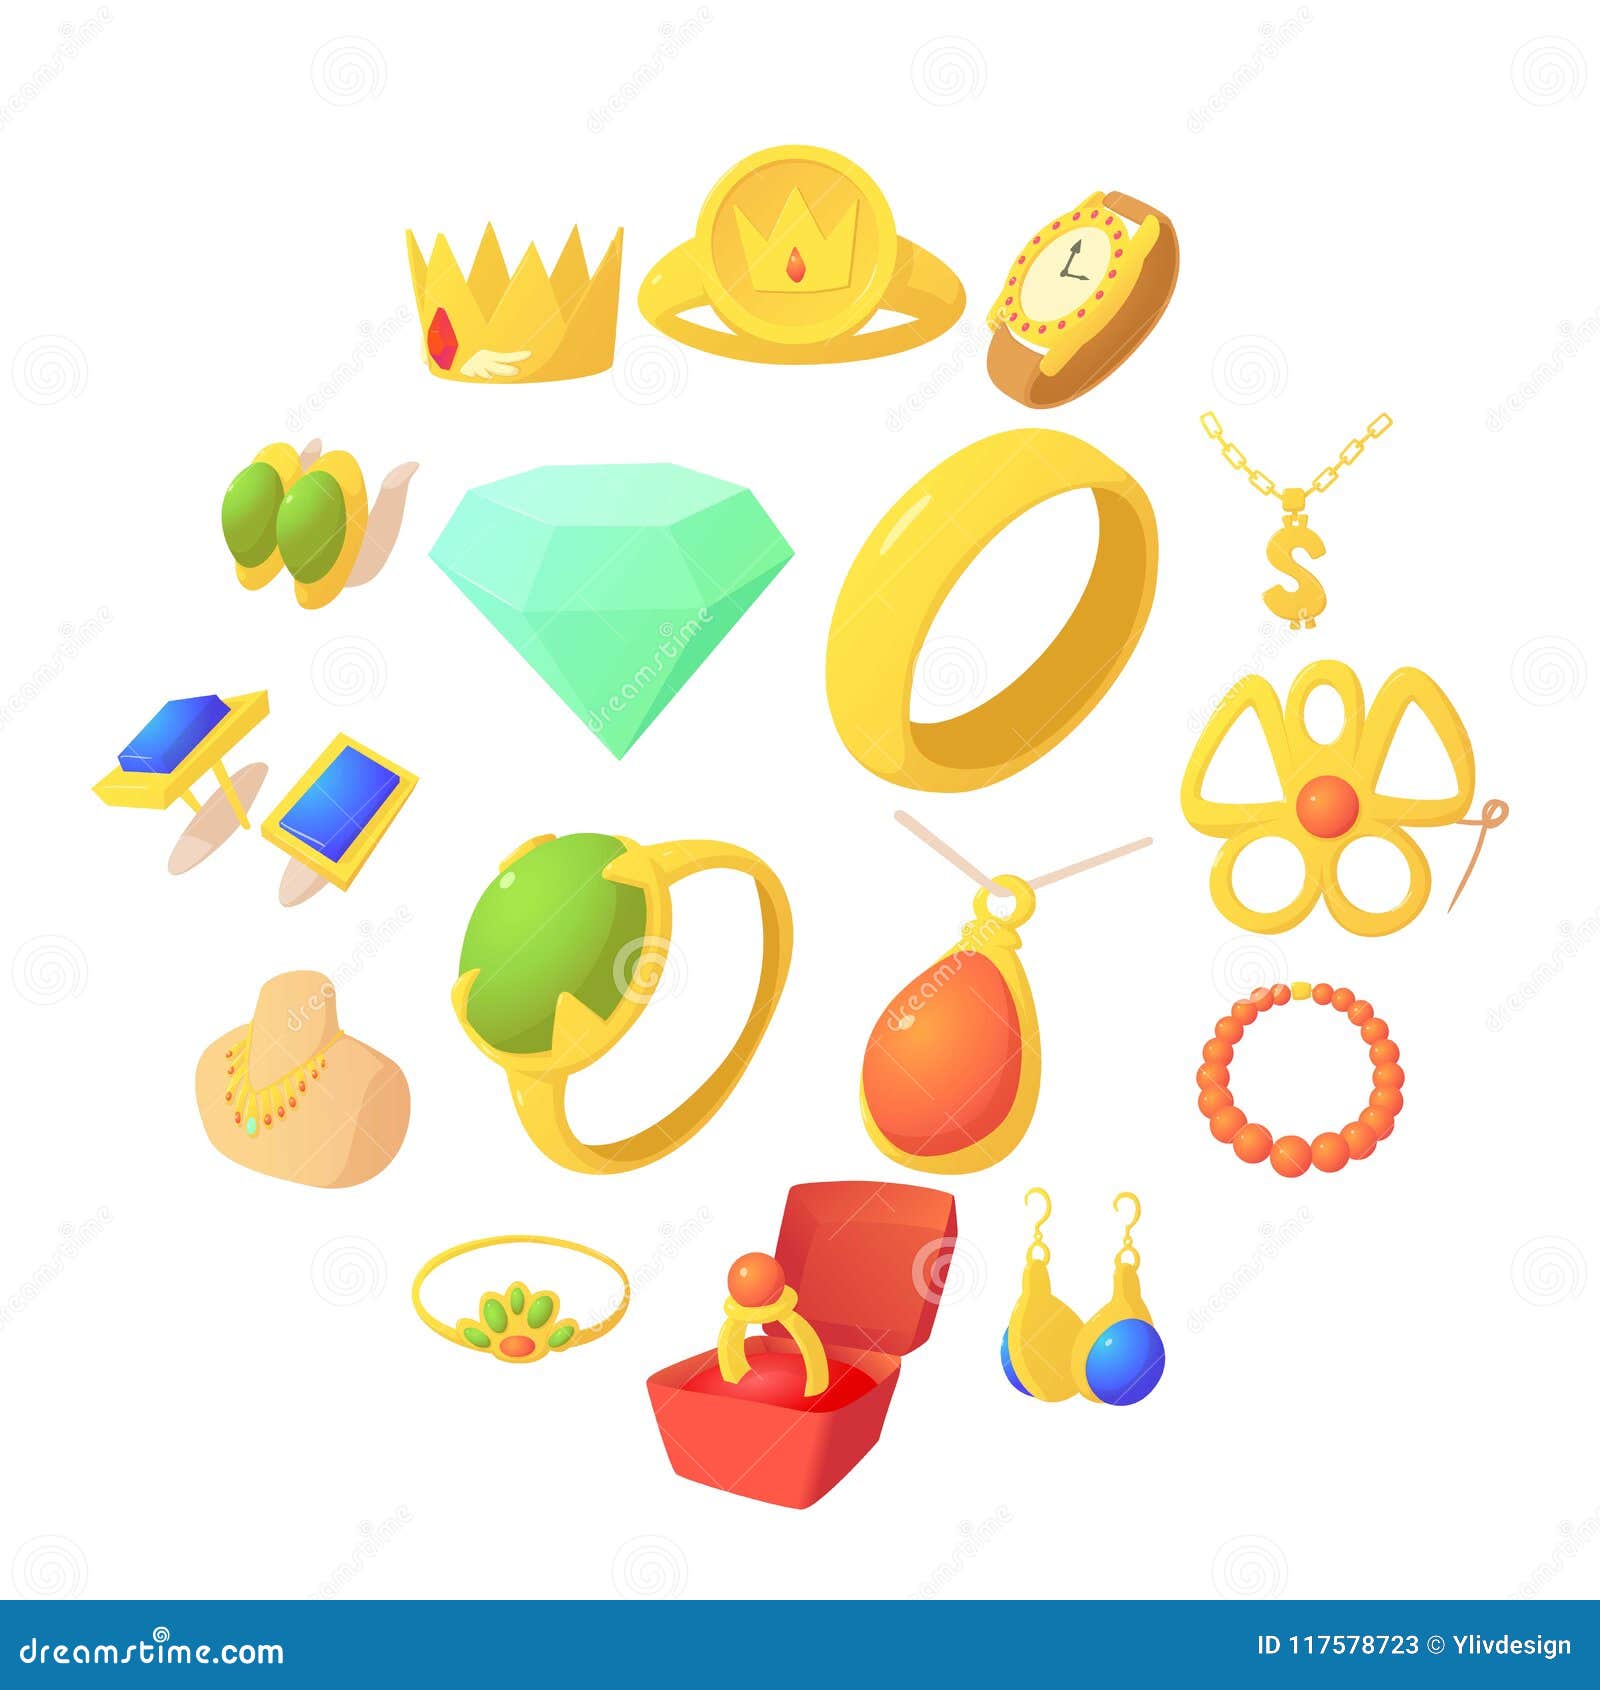 Jewelry Items Icons Set, Cartoon Style Stock Vector - Illustration of ...